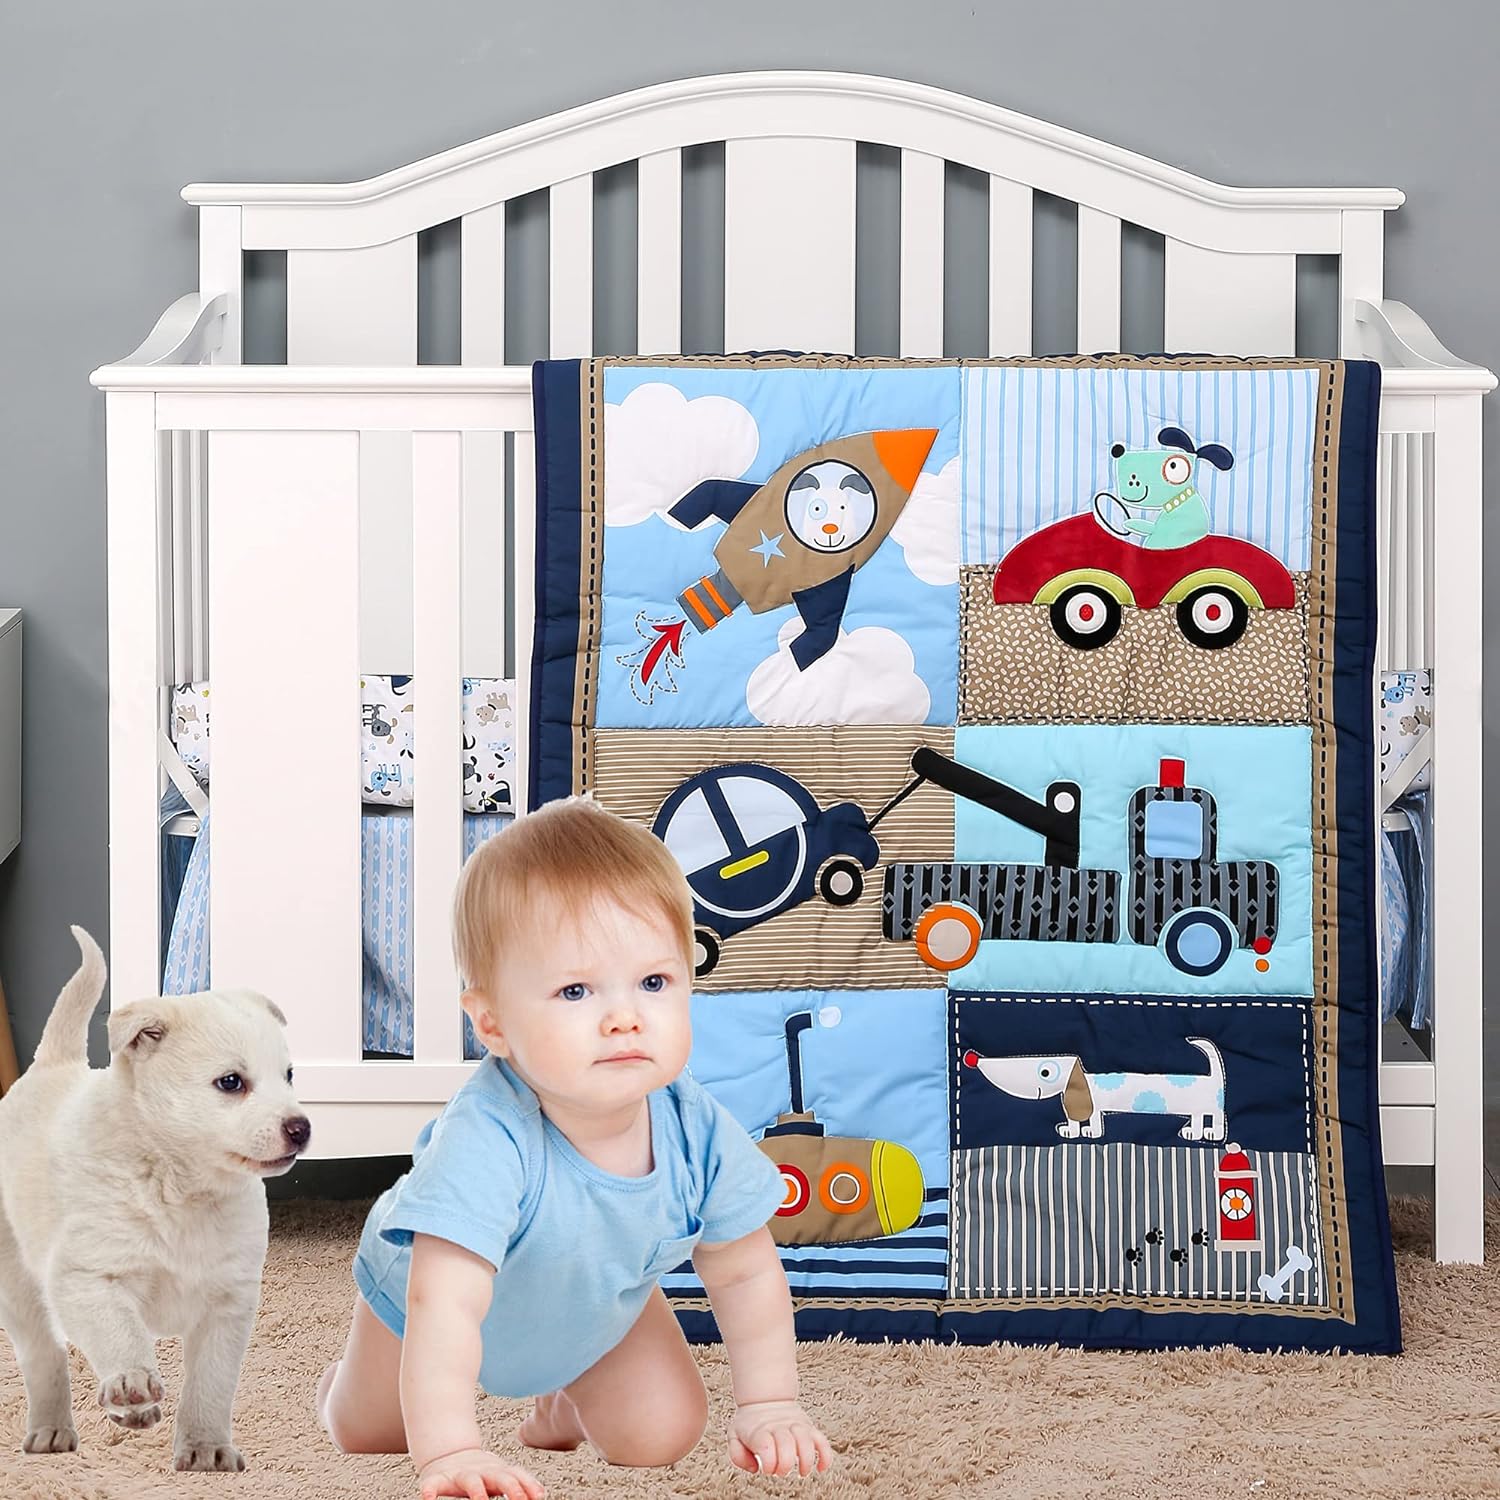 Embark on a Whimsical Journey: Brandream Crib Bedding Sets for Boys – Dog Go to Travel by Car Truck Rocket Submarine